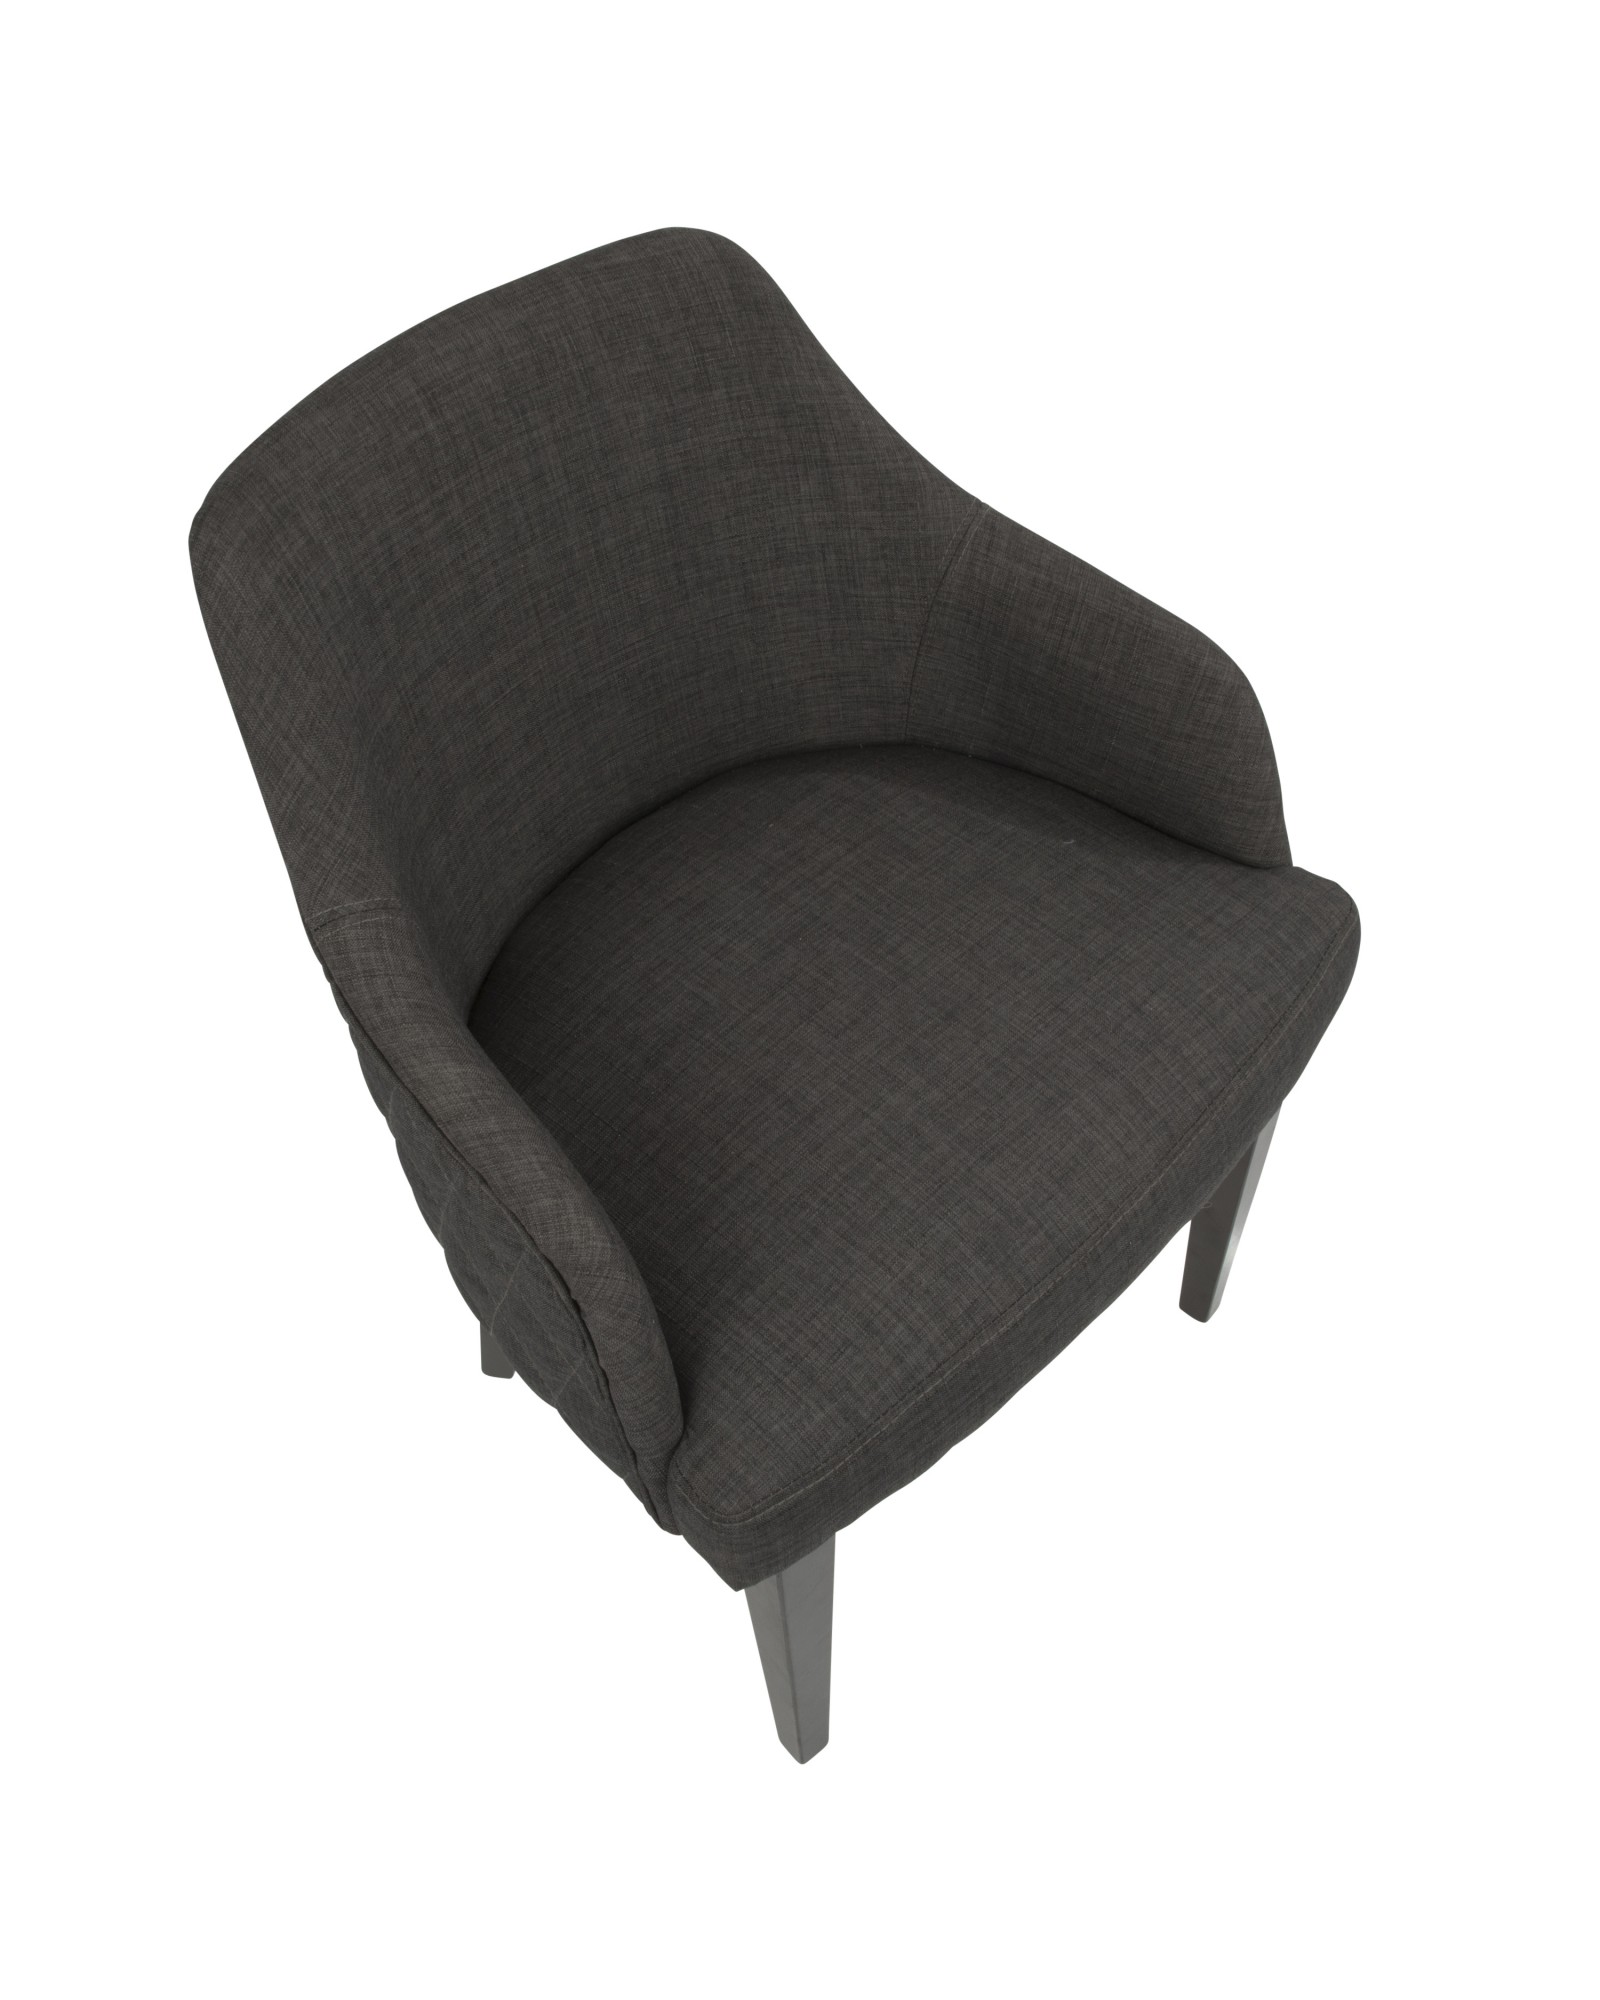 Elliott Contemporary Dining Chair in Espresso with Charcoal Fabric - Set of 2